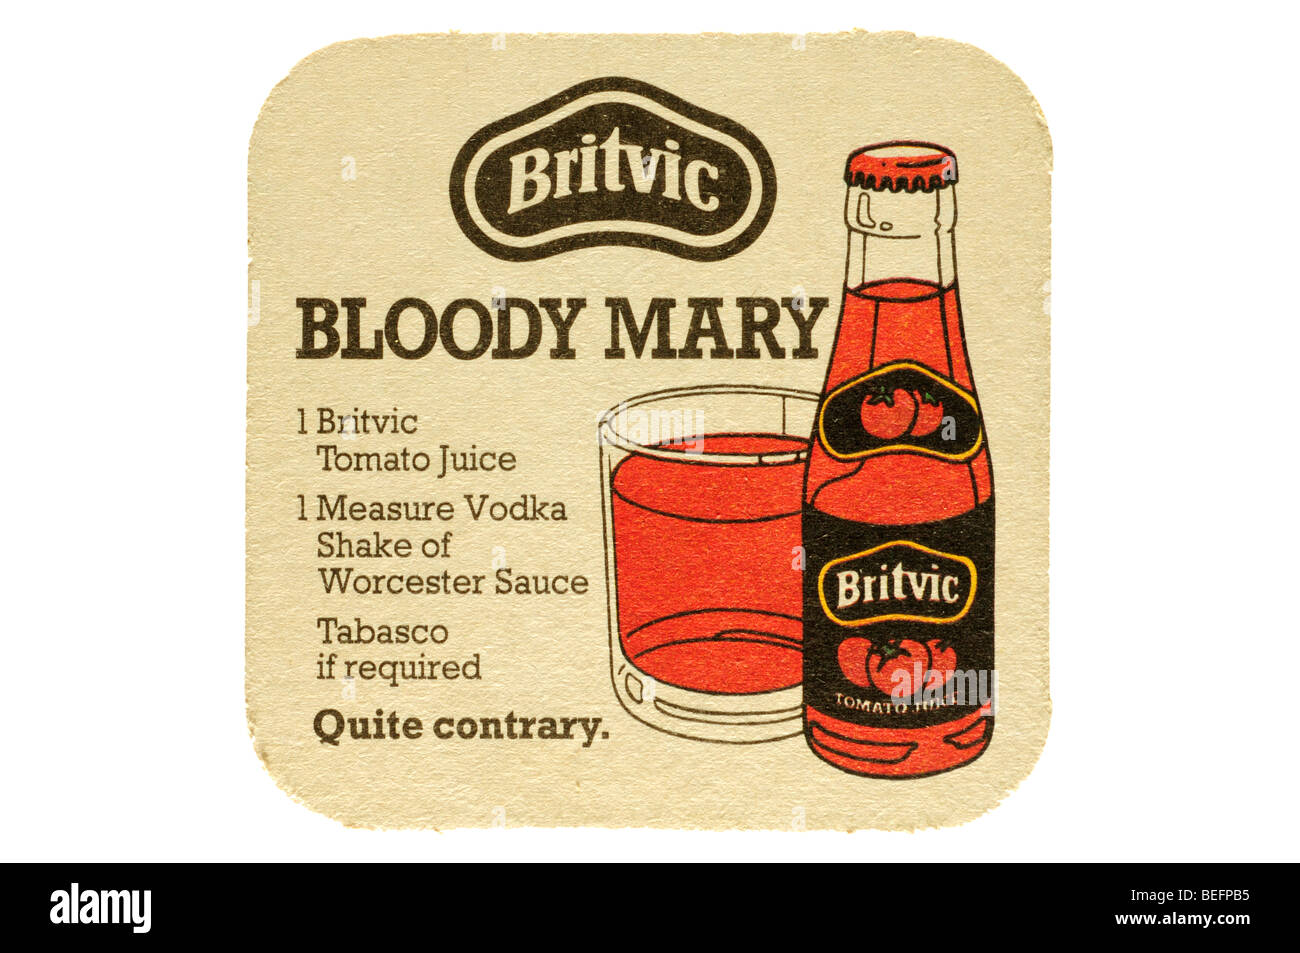 britvic bloody mary 1 britvic tomato juice 1 measure vodka shake of worcester sauce tabasco is required quite contrary Stock Photo